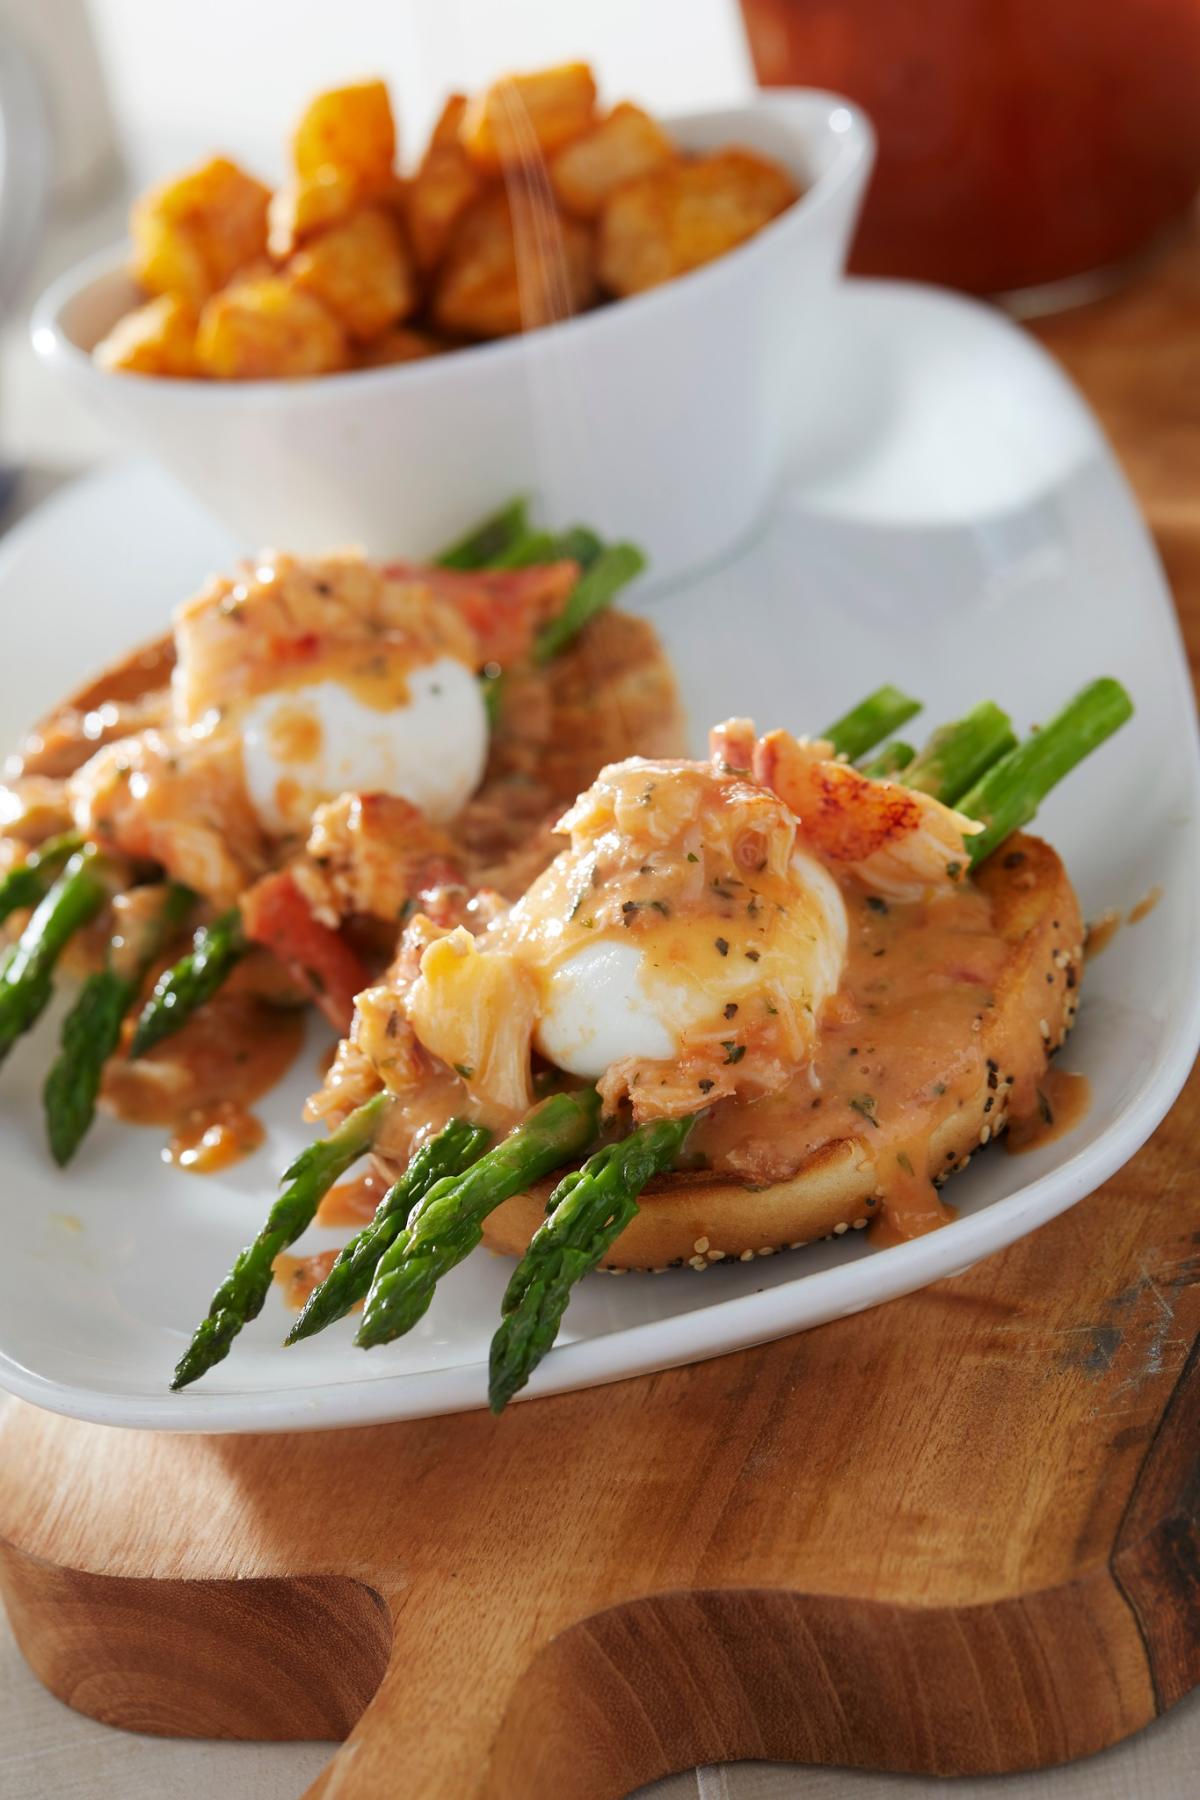 Another Broken Egg Cafe - Our Shrimp Benny is sure to motivate you to get  out of bed. Relish the flavorful bold twist on the Benedict with poached  eggs, sautéed mushrooms, roasted